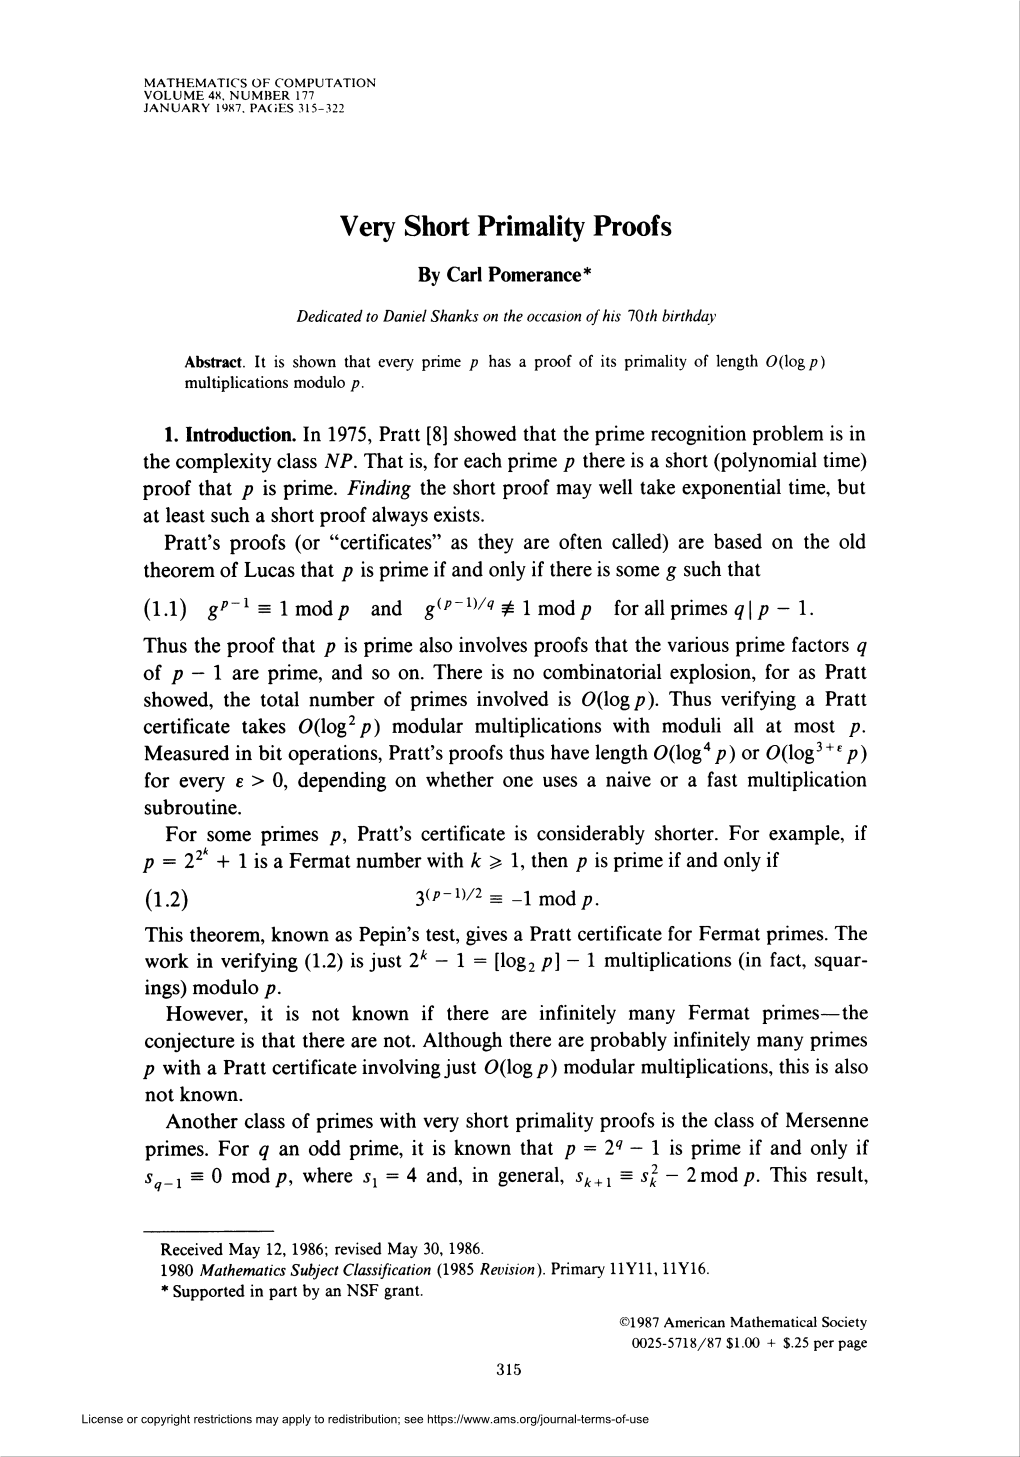 Very Short Primality Proofs